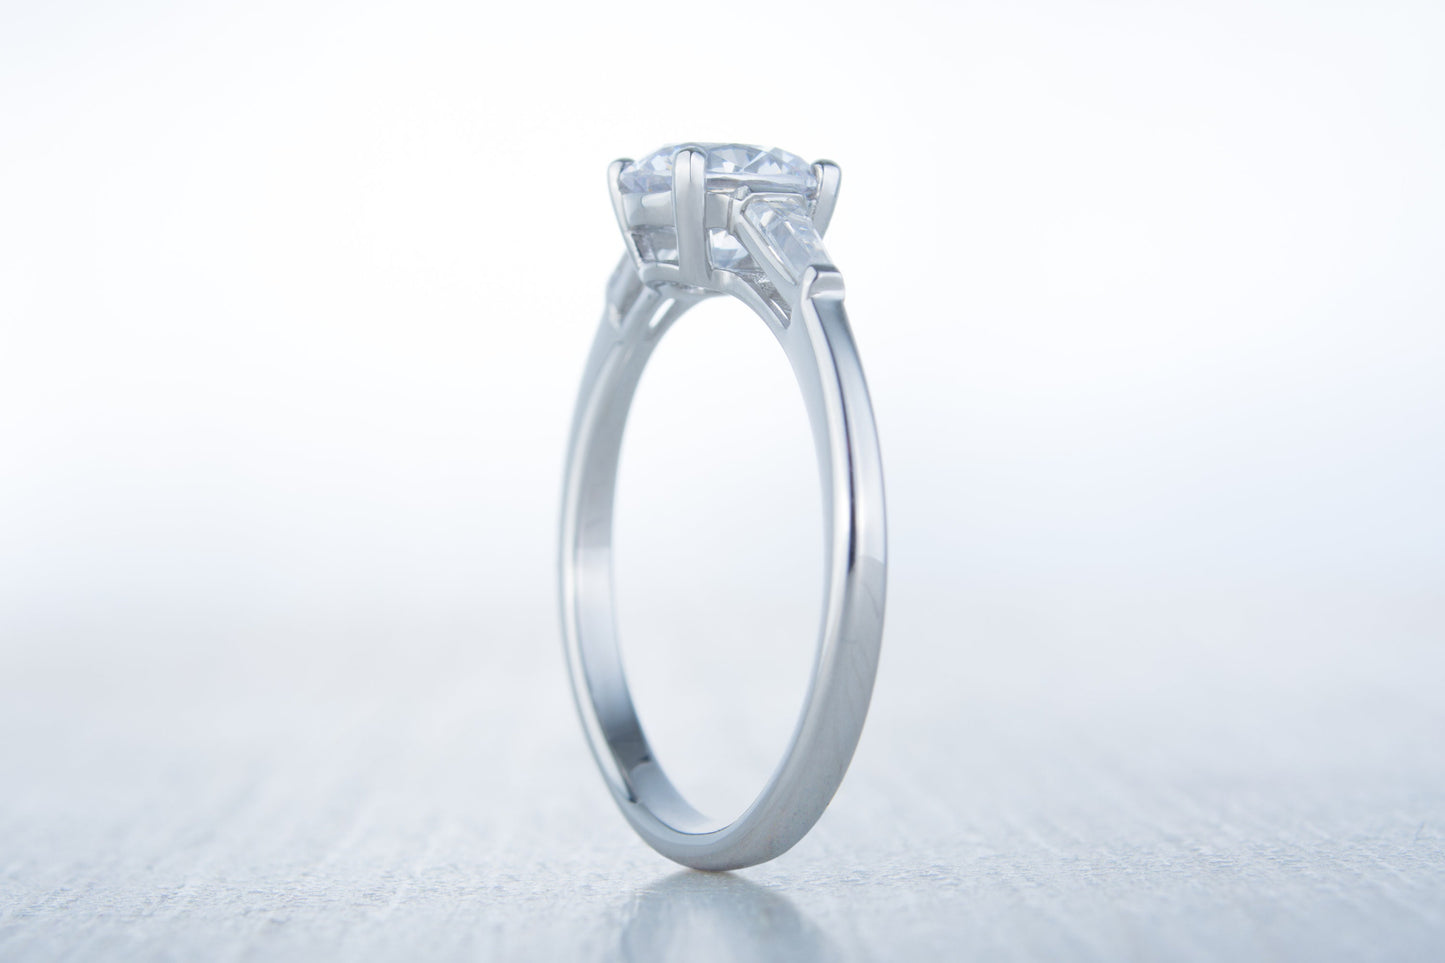 1.5ct Diamond simulant solitaire ring available in Sterling Silver or white gold filled - engagement ring